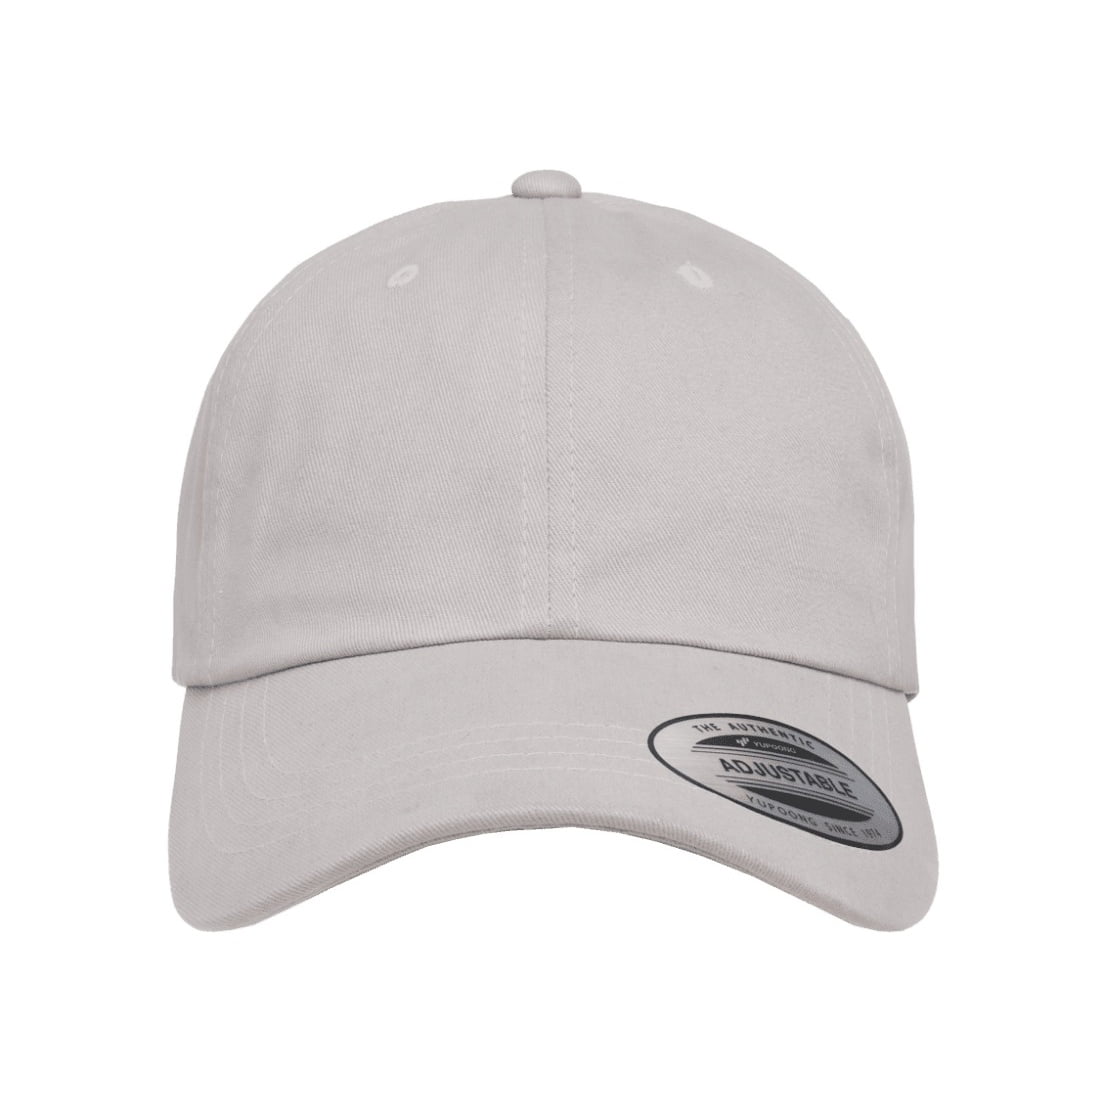 Flexfit By Yupoong Peached Cotton Twill Dad Cap